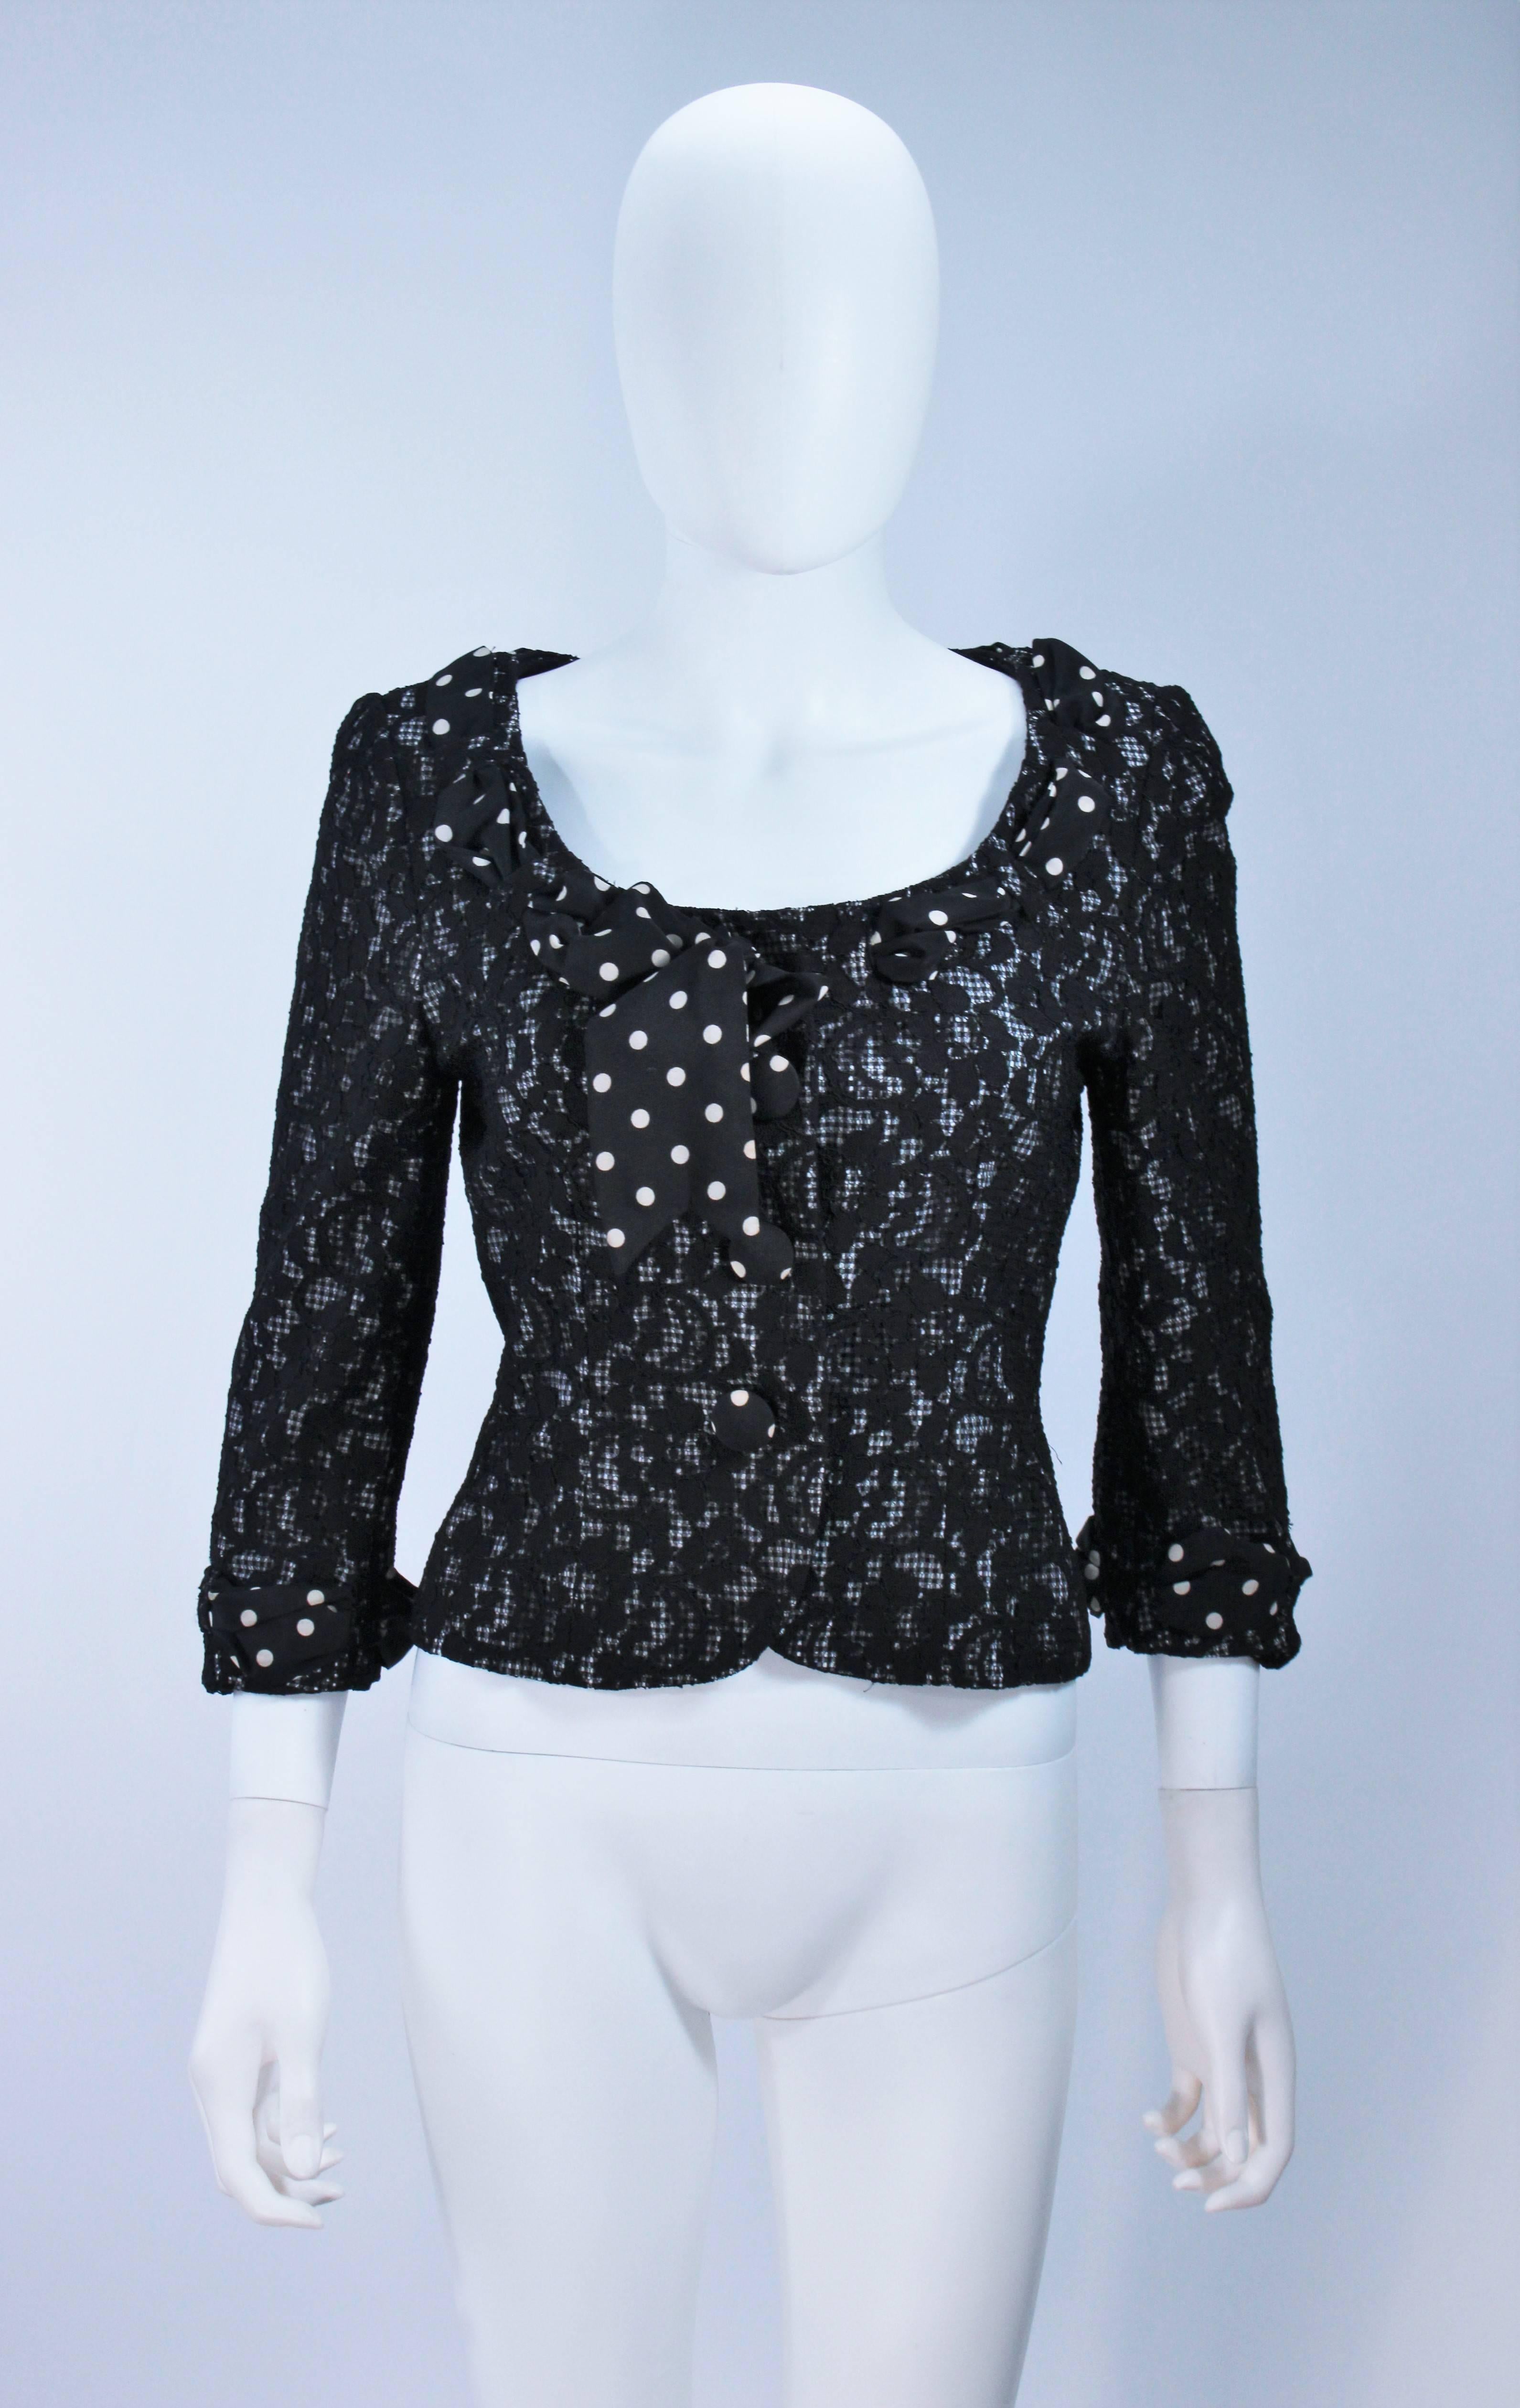  This Moschino  jacket is composed of a mixed combination of fabric patterns, there is a gingham base with a lace overlay and a silk polka dot scarf detail. There are center front closures. In great condition. 

Measures (Approximately)
Length: